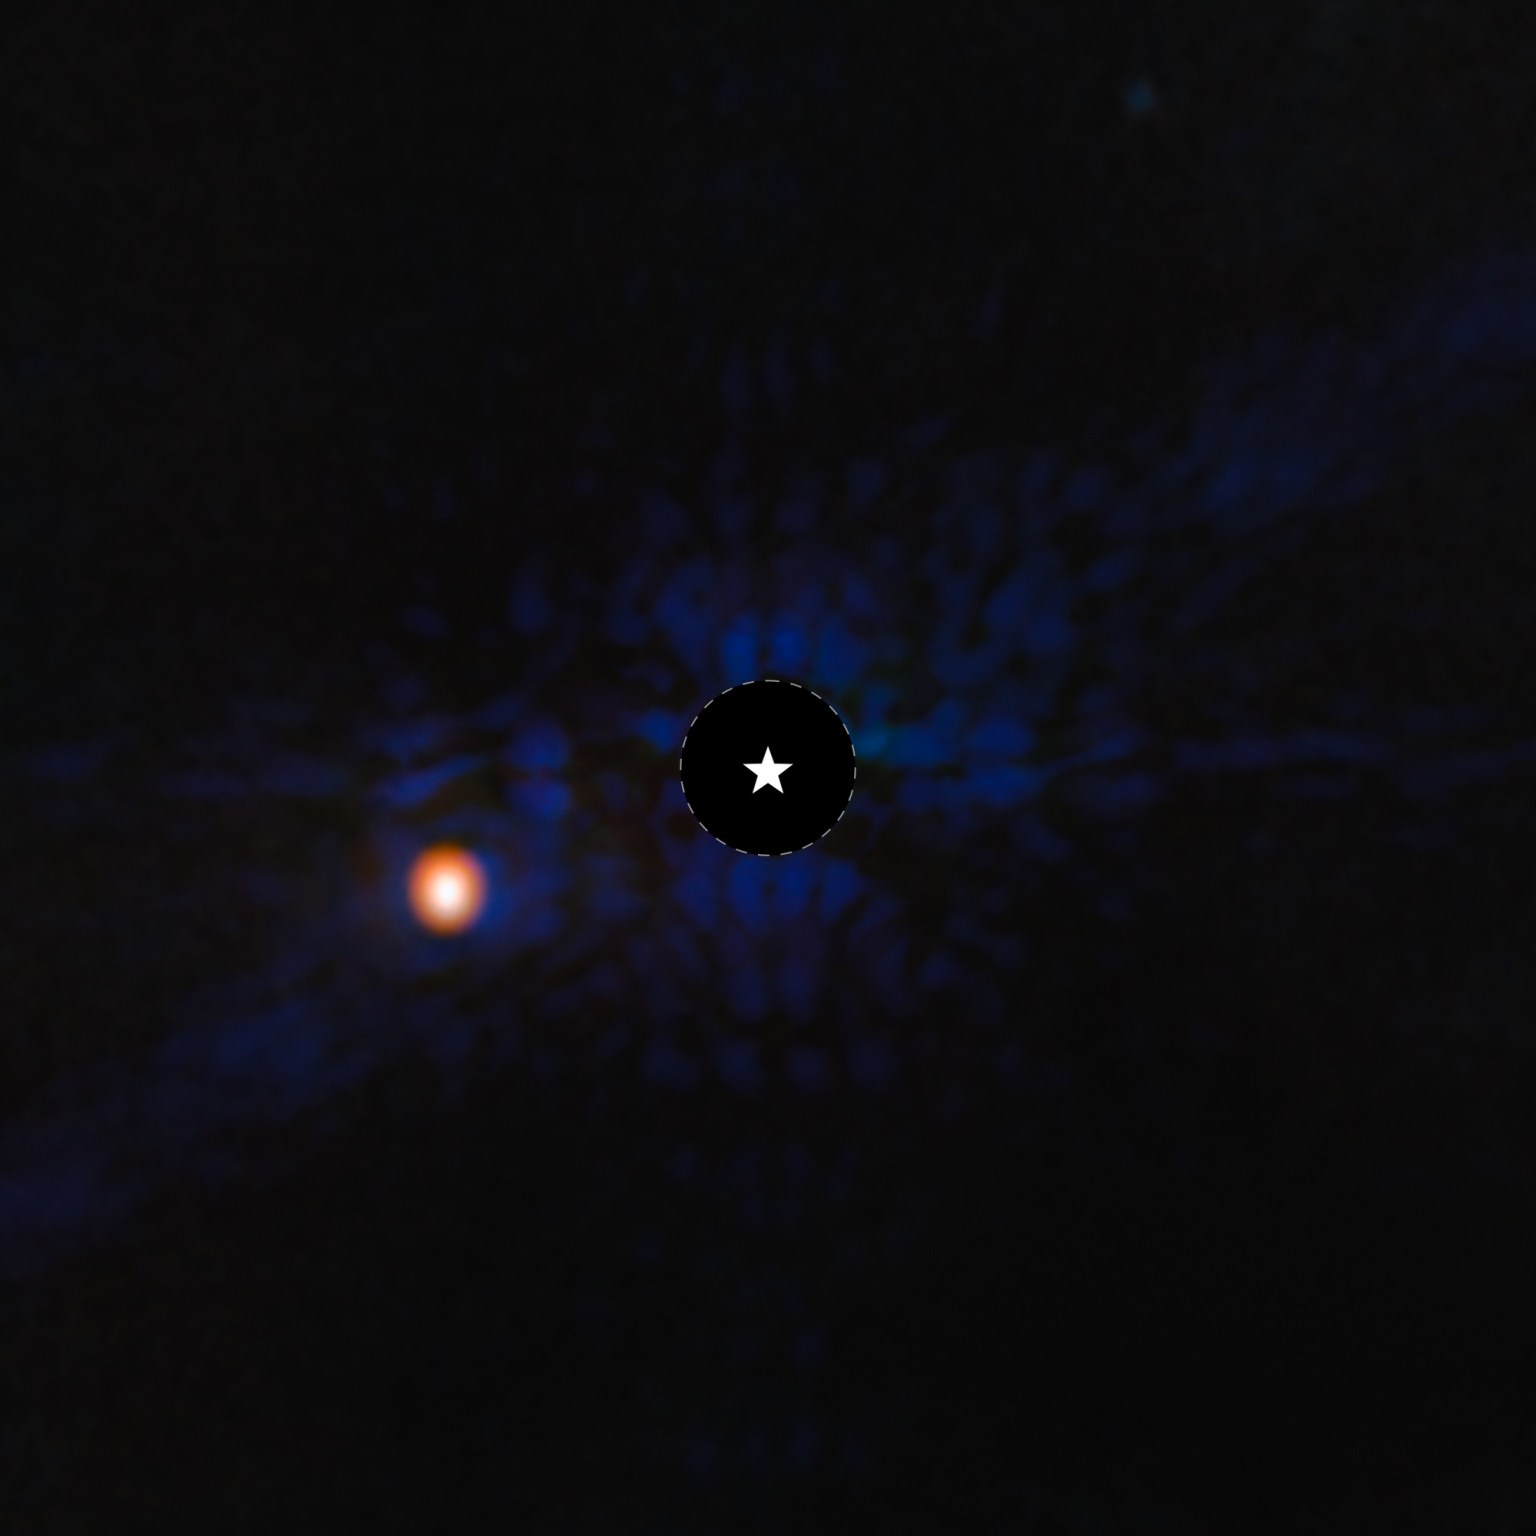 This image shows the exoplanet Epsilon Indi Ab. The image is mostly black, with blue scale-like features apparent in the central region of the image. At the center of the image, there is a black circle, and in the center, a symbol representing a star. This black circle blocks the light from the host star. To the lower left of the circle is a fuzzy bright orange circle, which is the exoplanet.